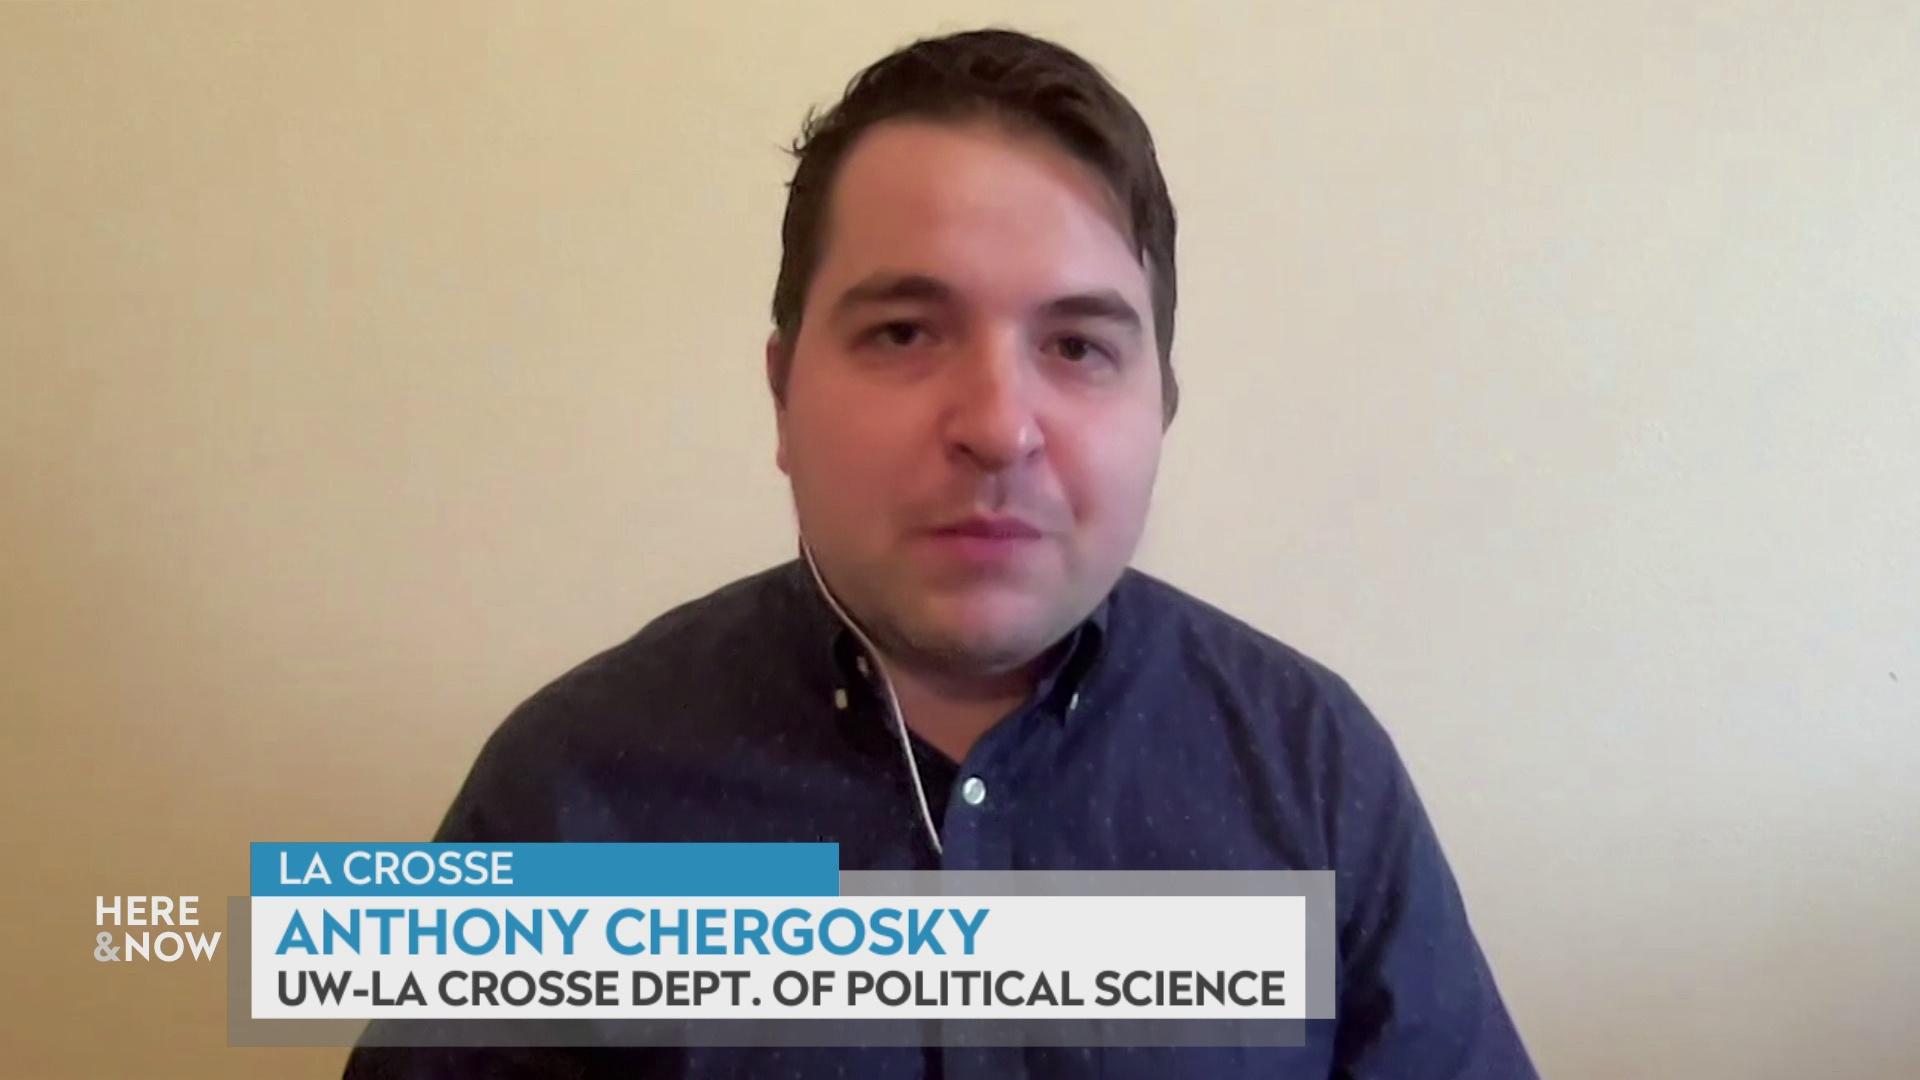 A still image from a video shows Anthony Chergosky seated in front of a blank wall, with a graphic at bottom reading 'La Crosse,' 'Anthony Chergosky' and 'UW-La Crosse Dept. of Political Science.'